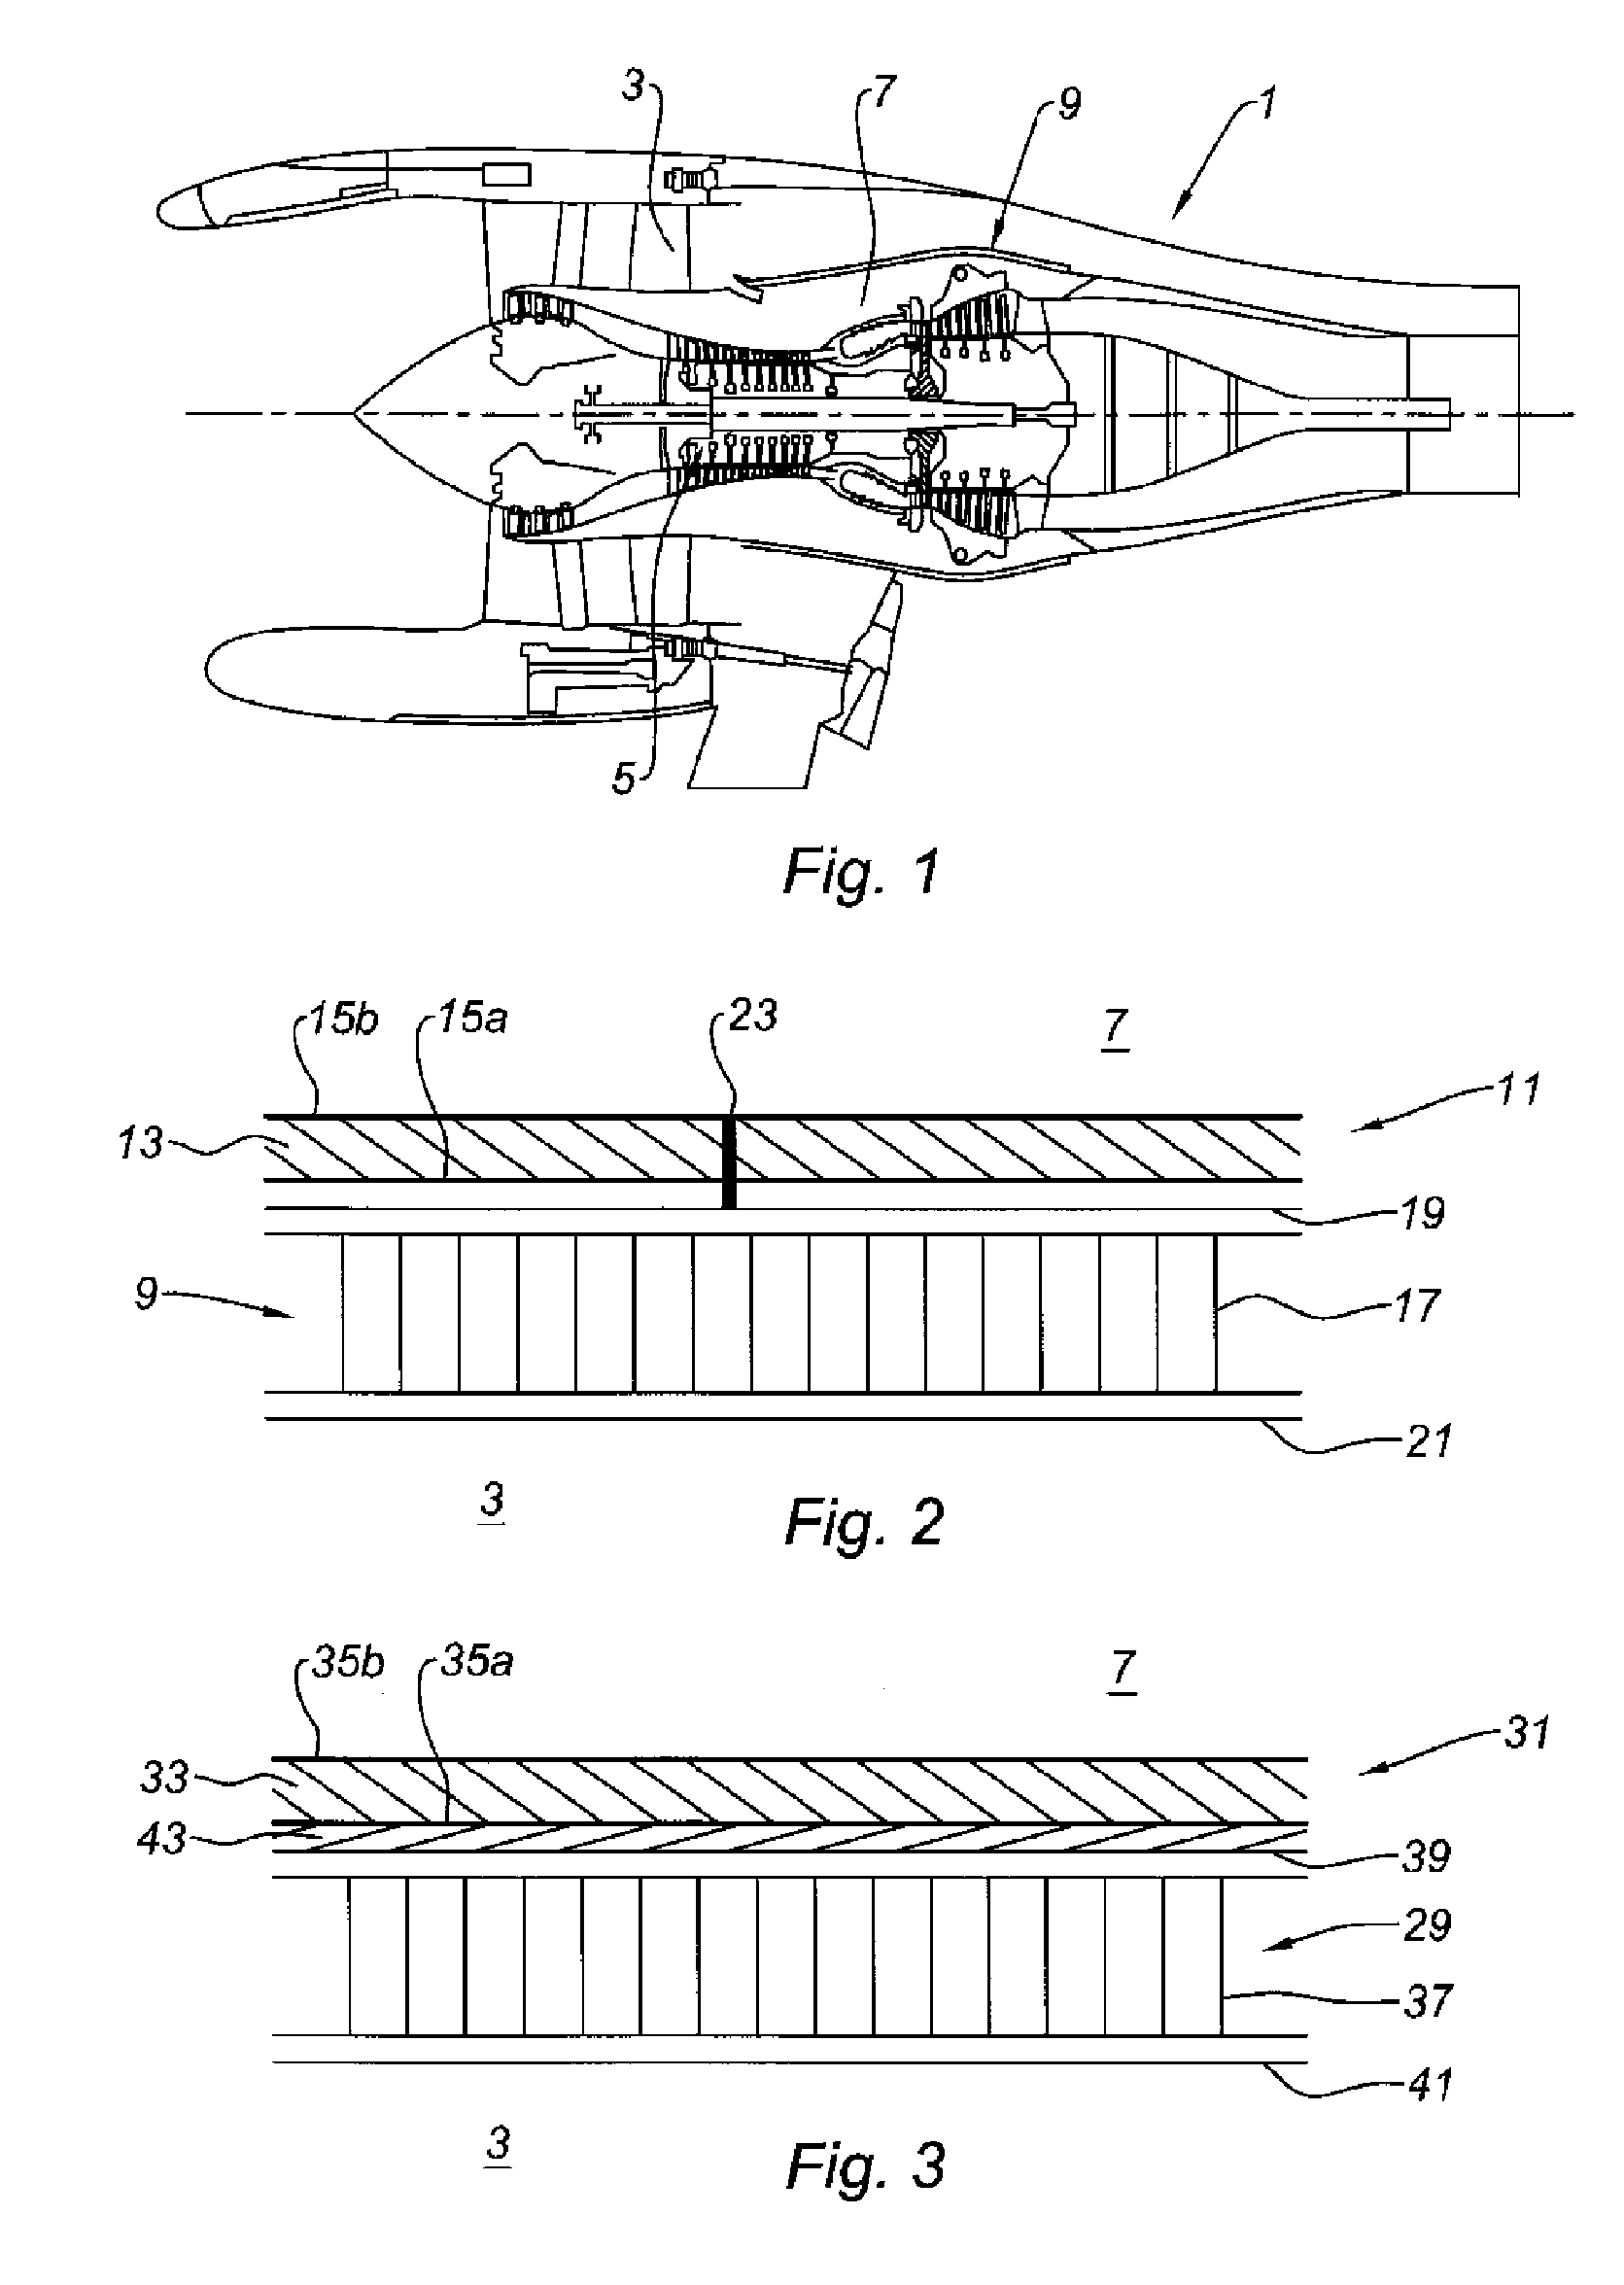 Method for installing heat shielding on a fixed internal structure of a jet engine nacelle